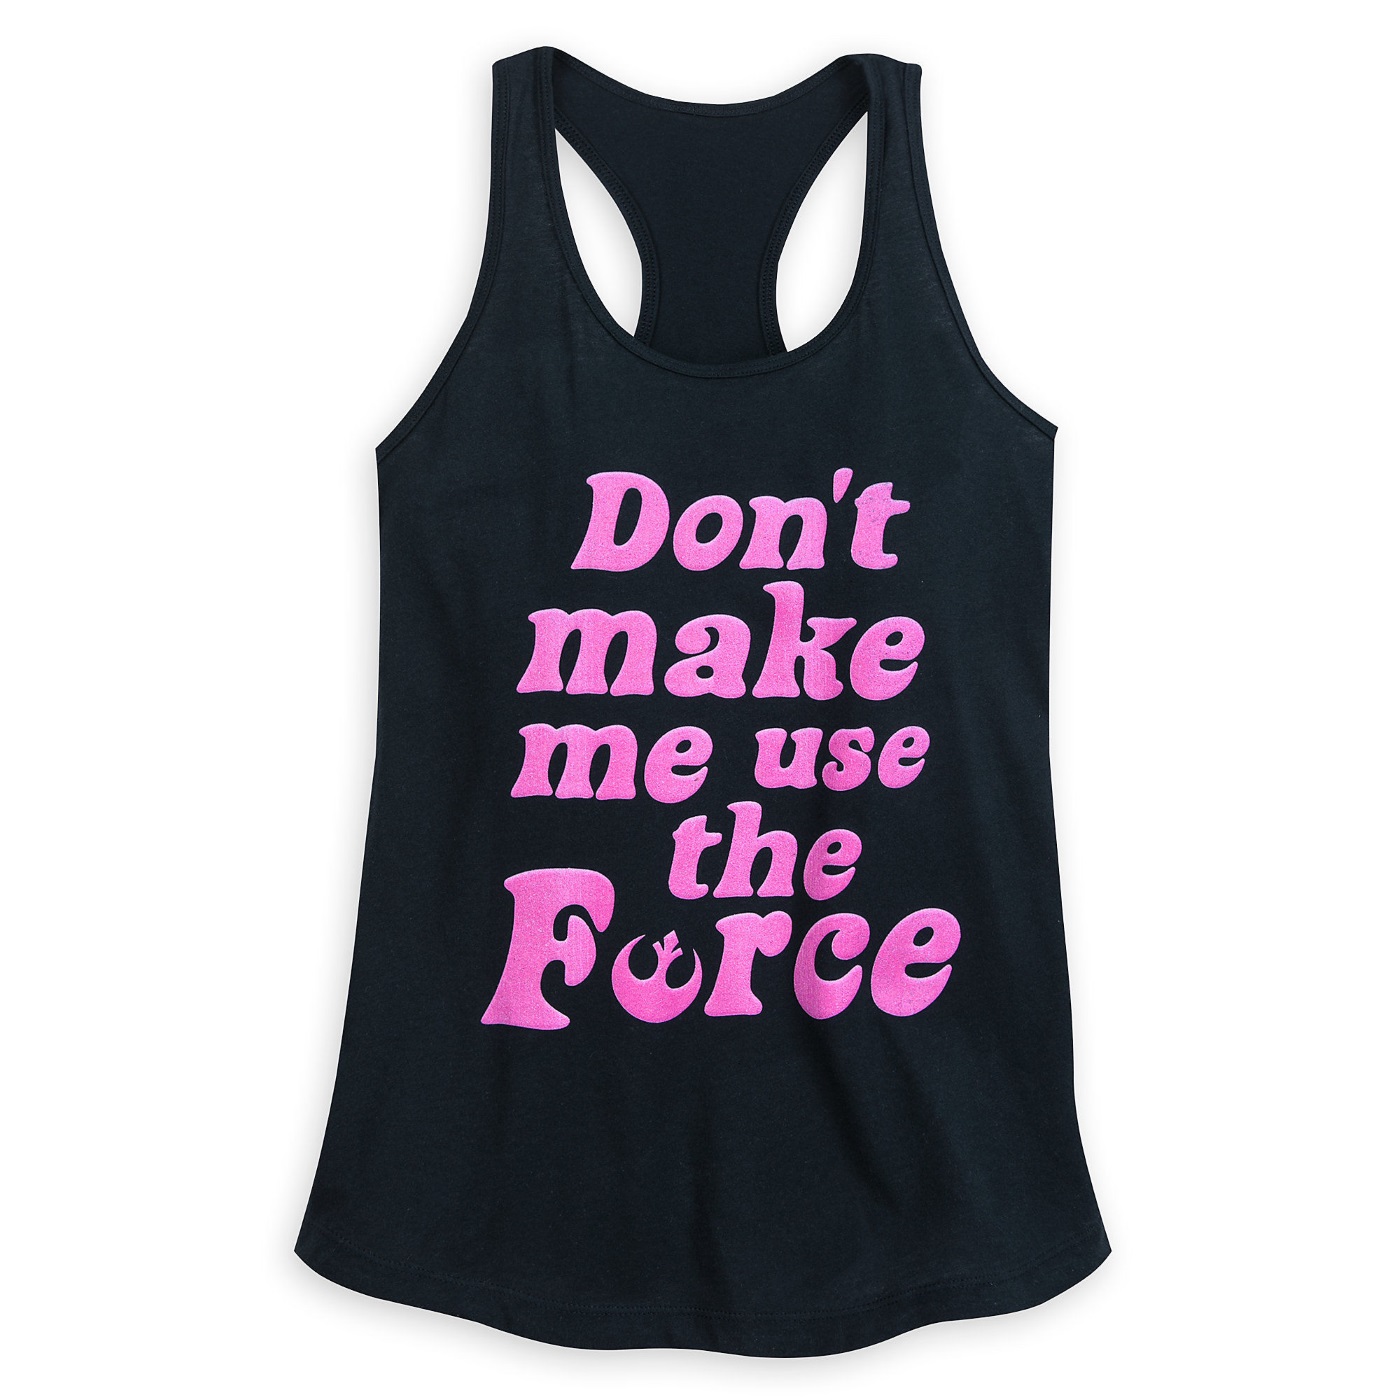 Women's Star Wars Don't Make Me Use The Force Tank Top at Shop Disney